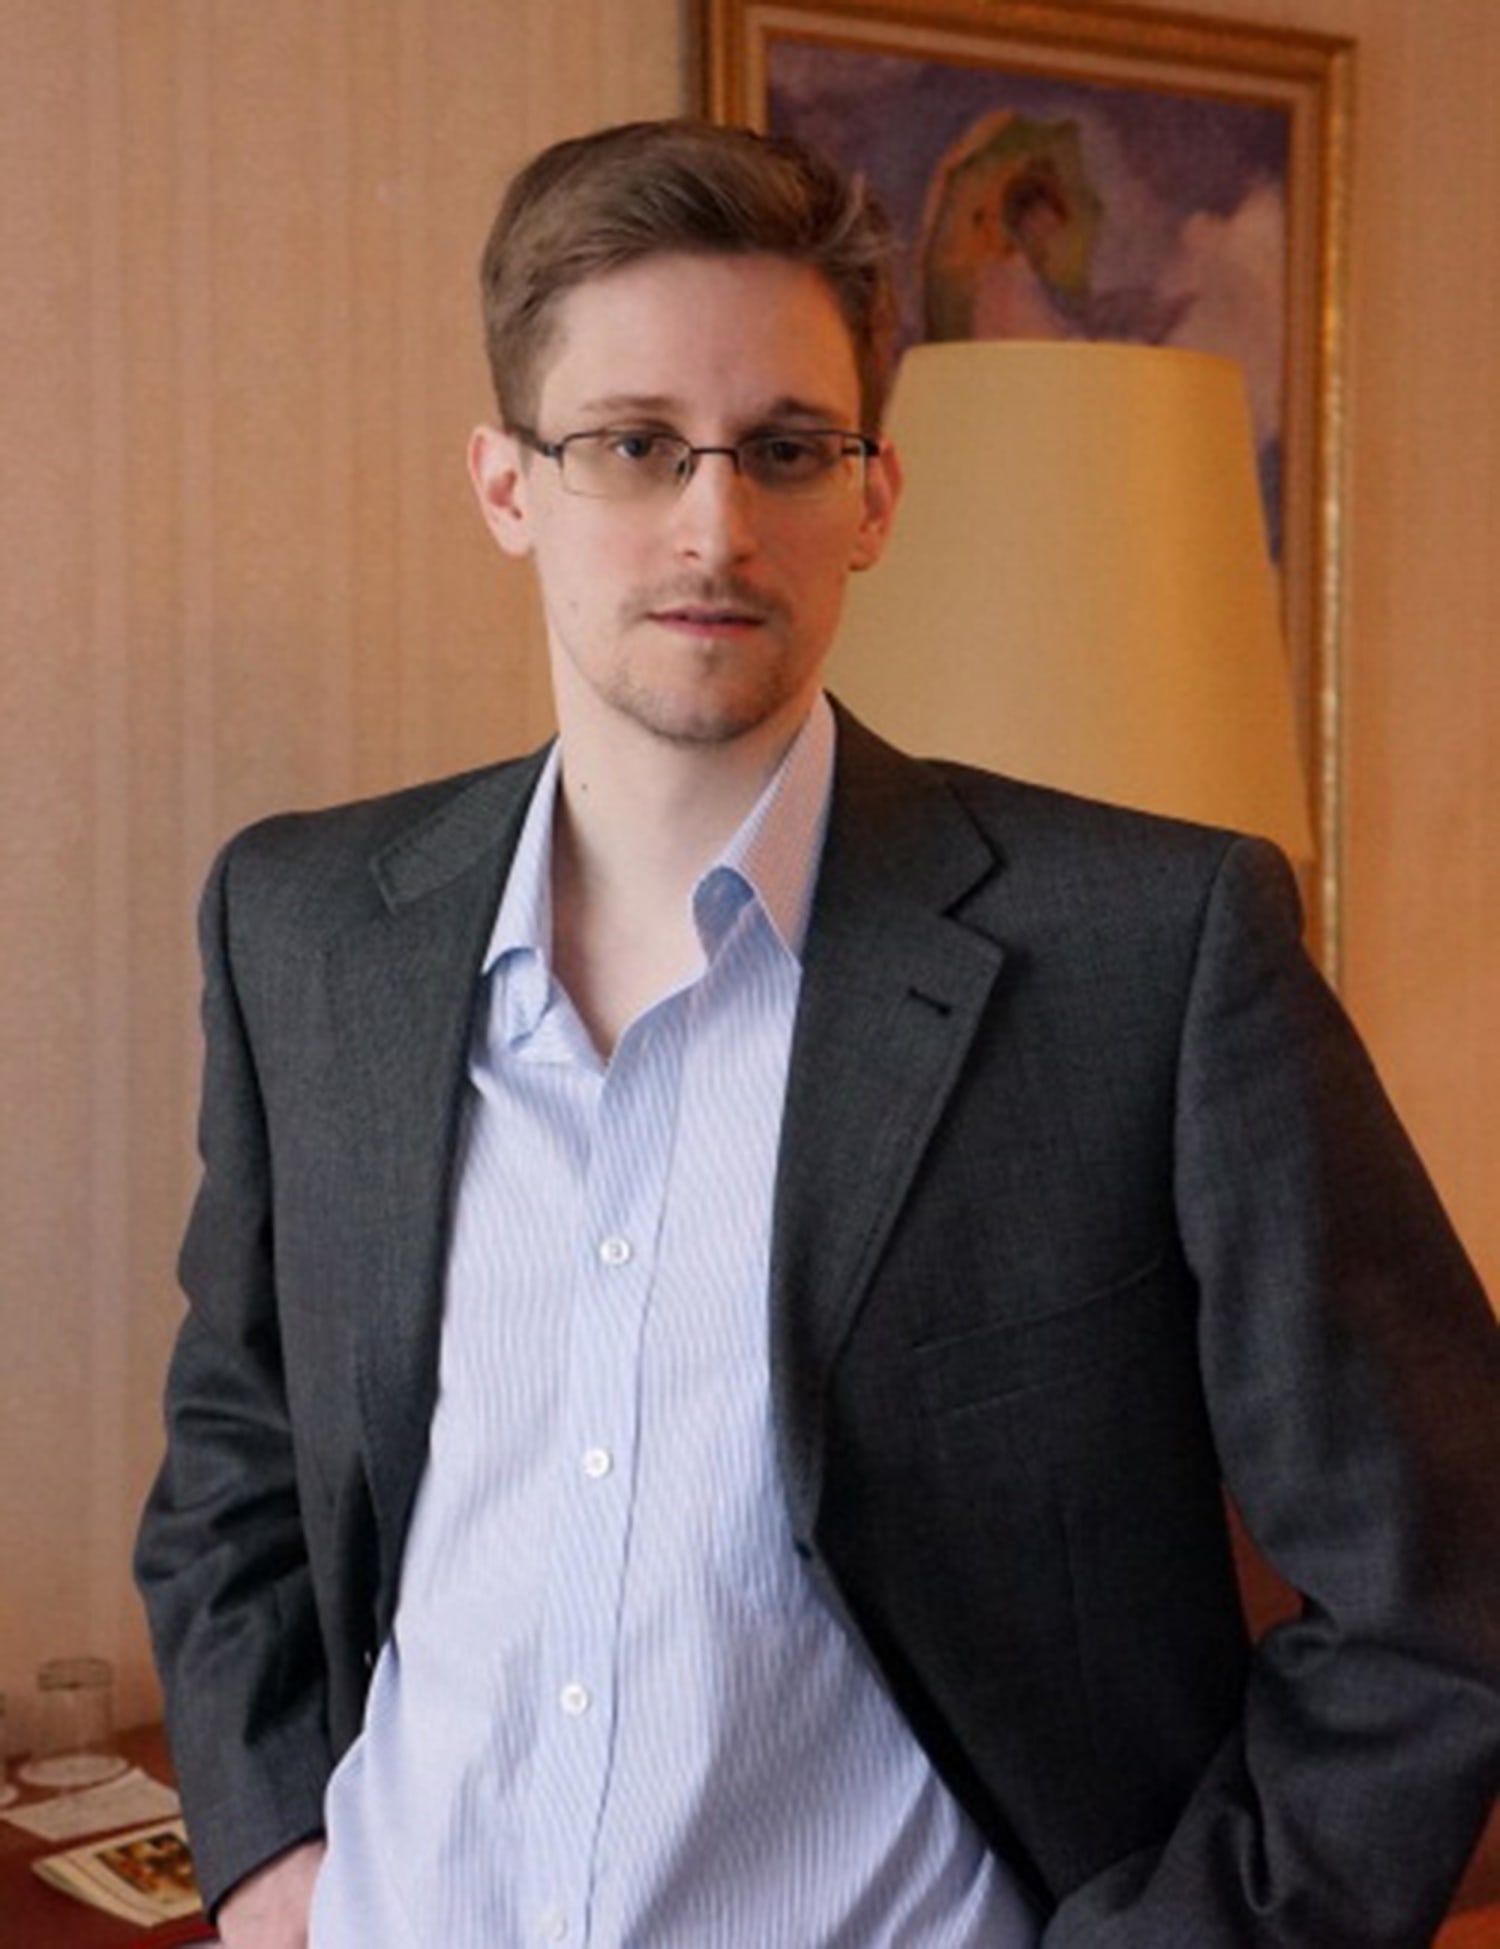 Edward Snowden claims FBI may have started file on overnight